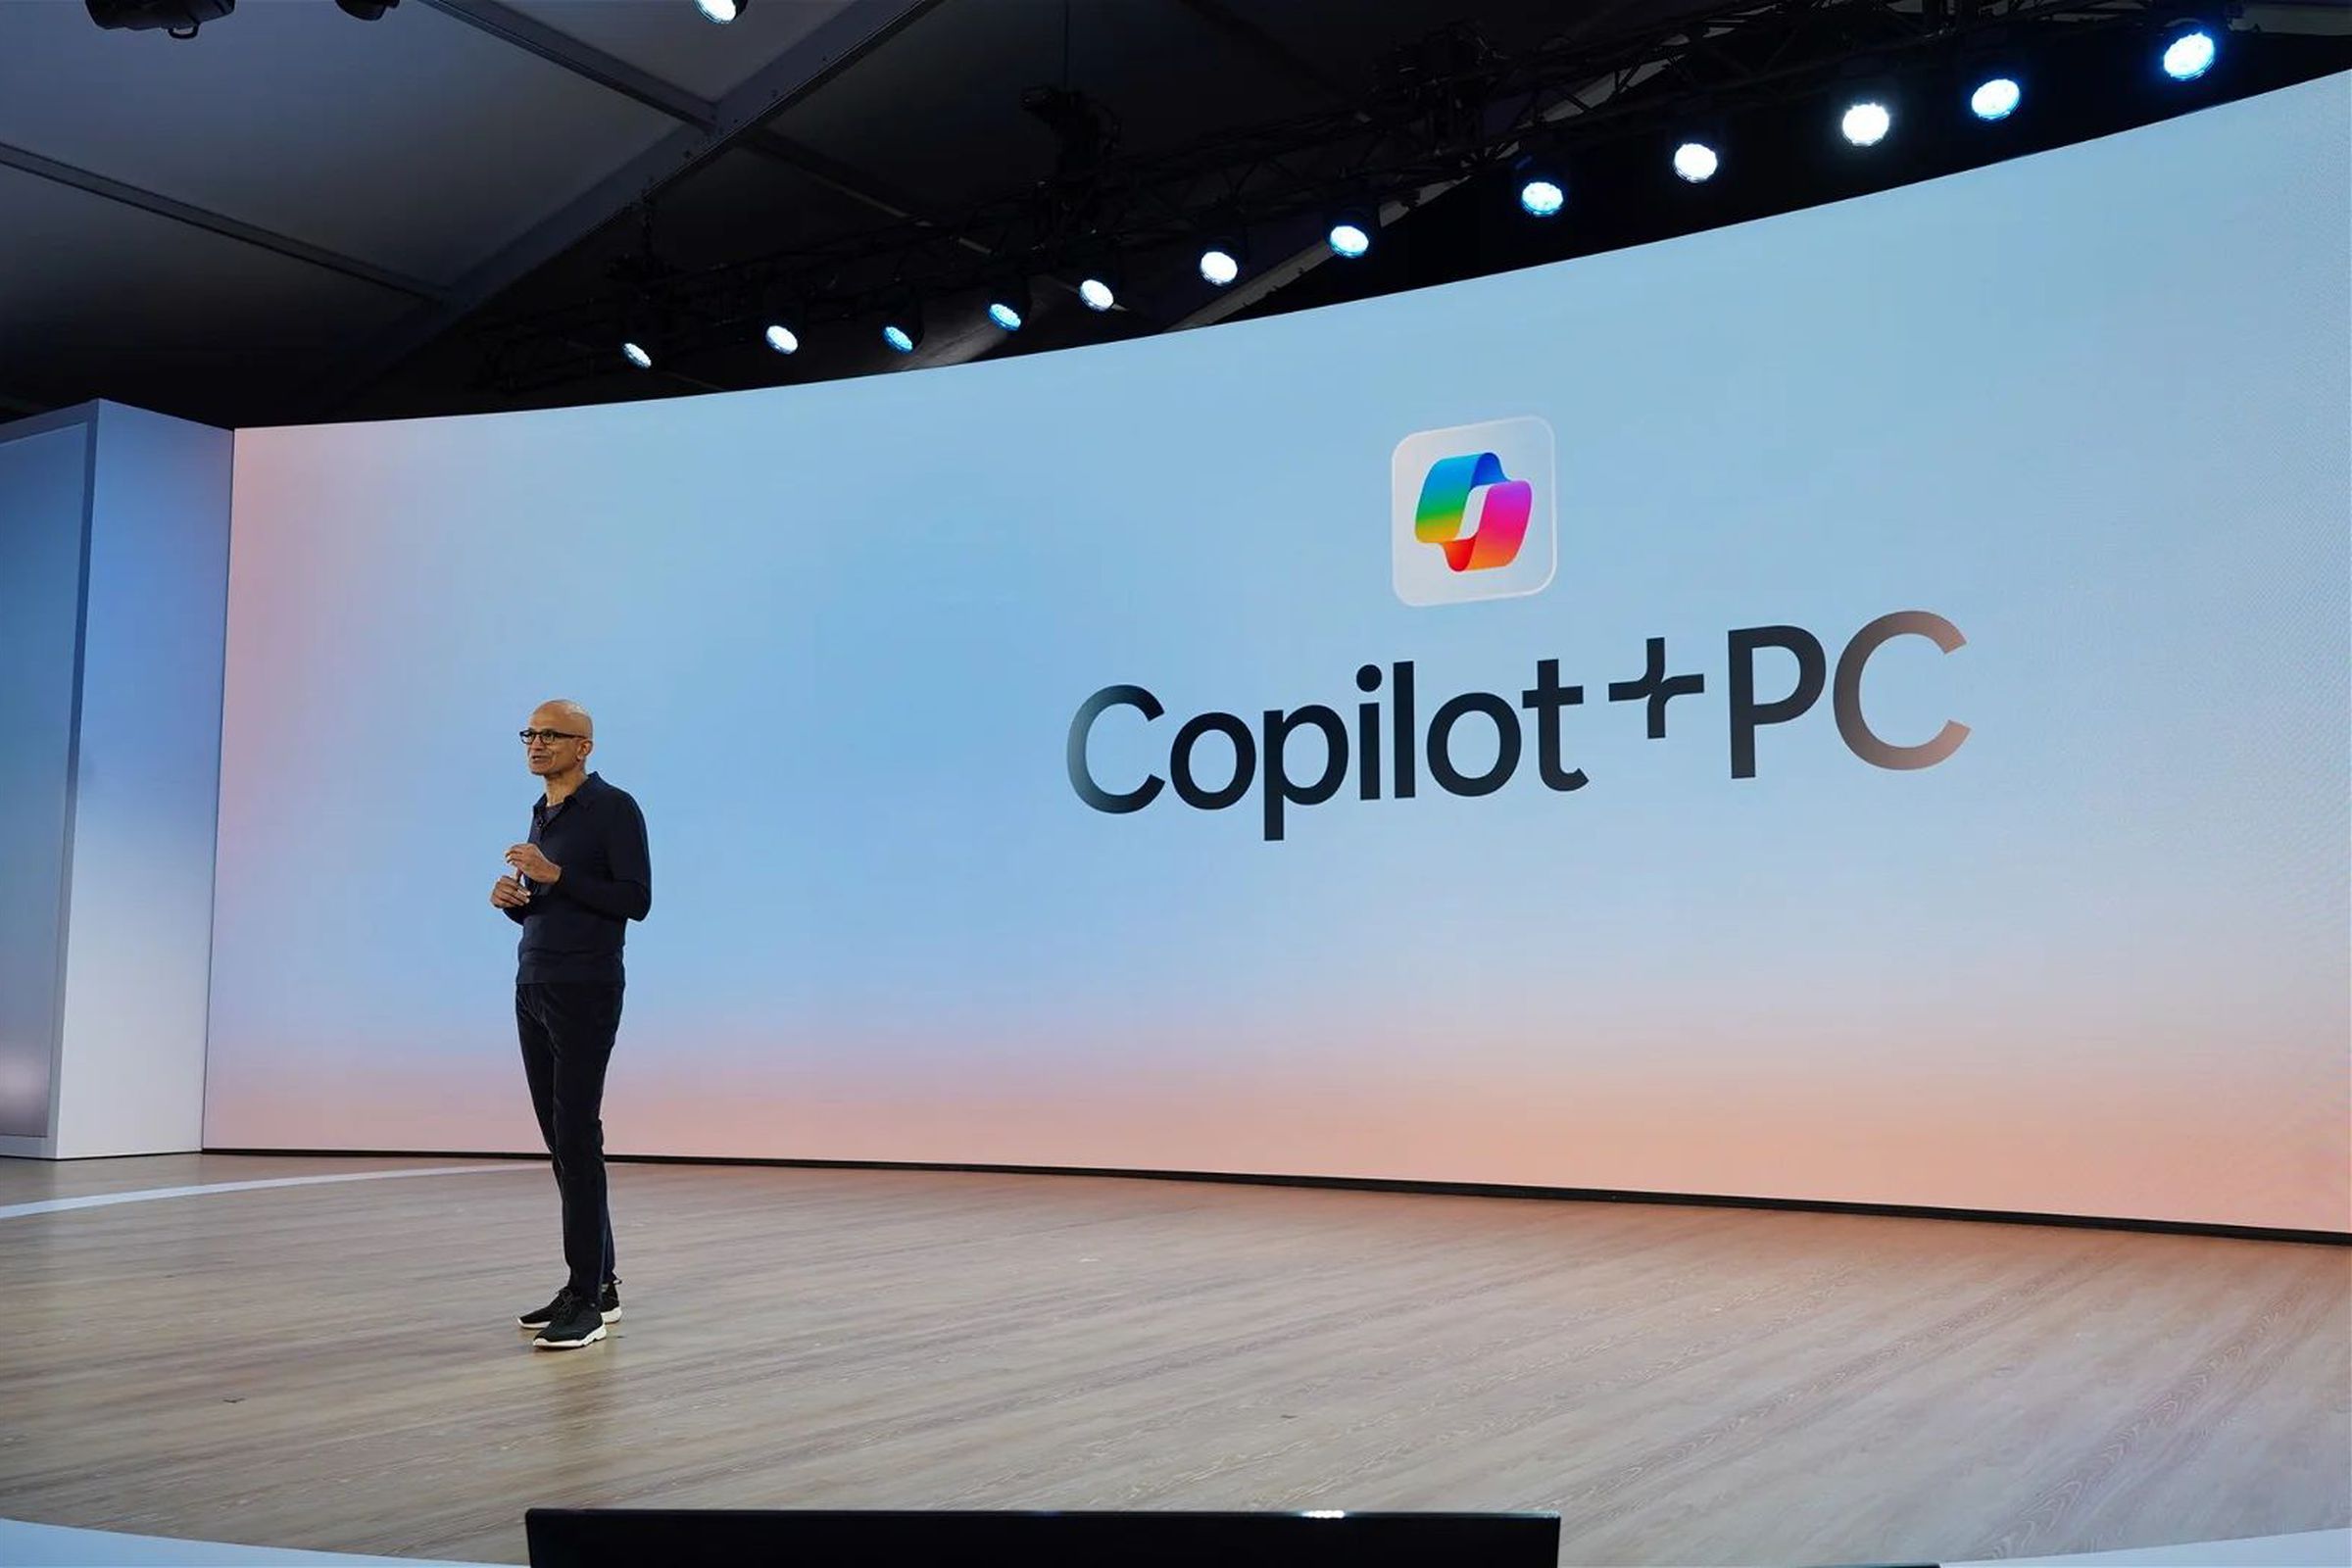 Microsoft CEO Satya Nadella standing in front of a screen reading “Copilot+PC”